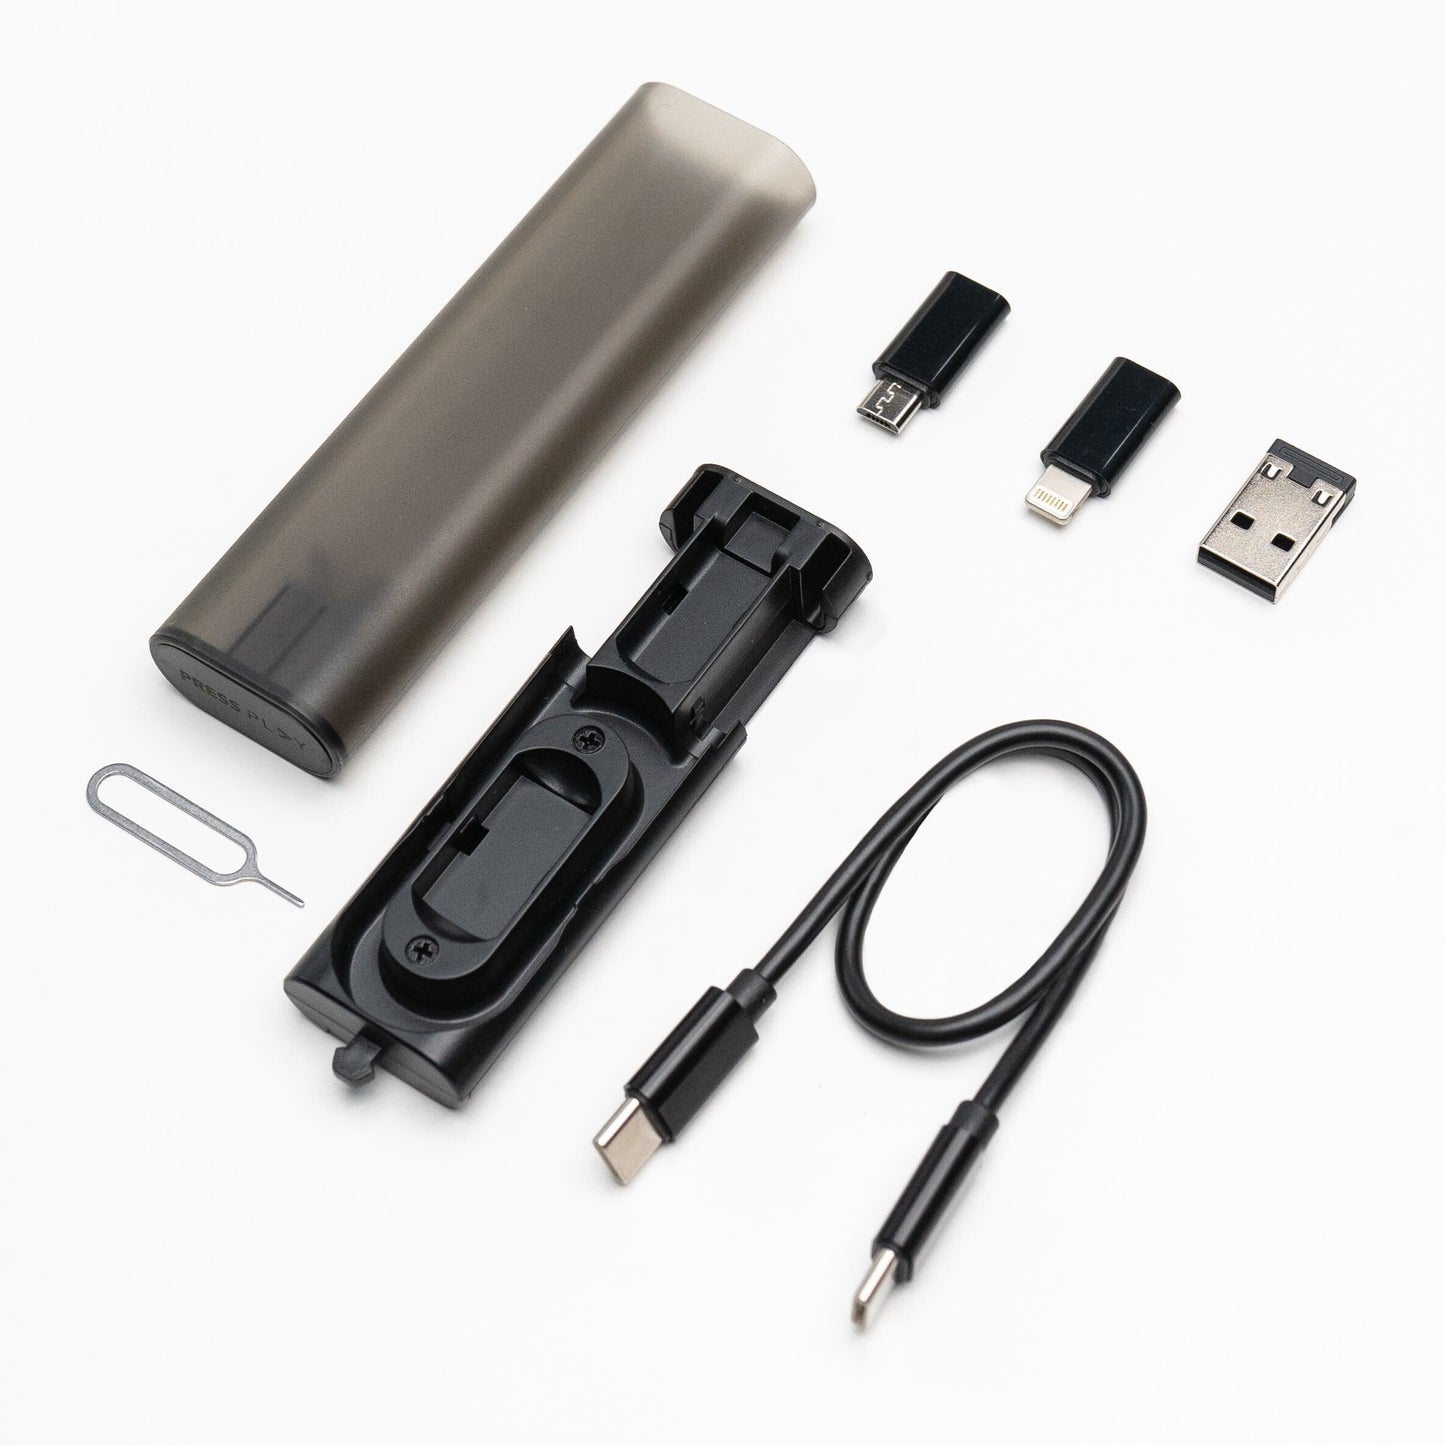 7 in 1 Cable Travel Kit by Press Play